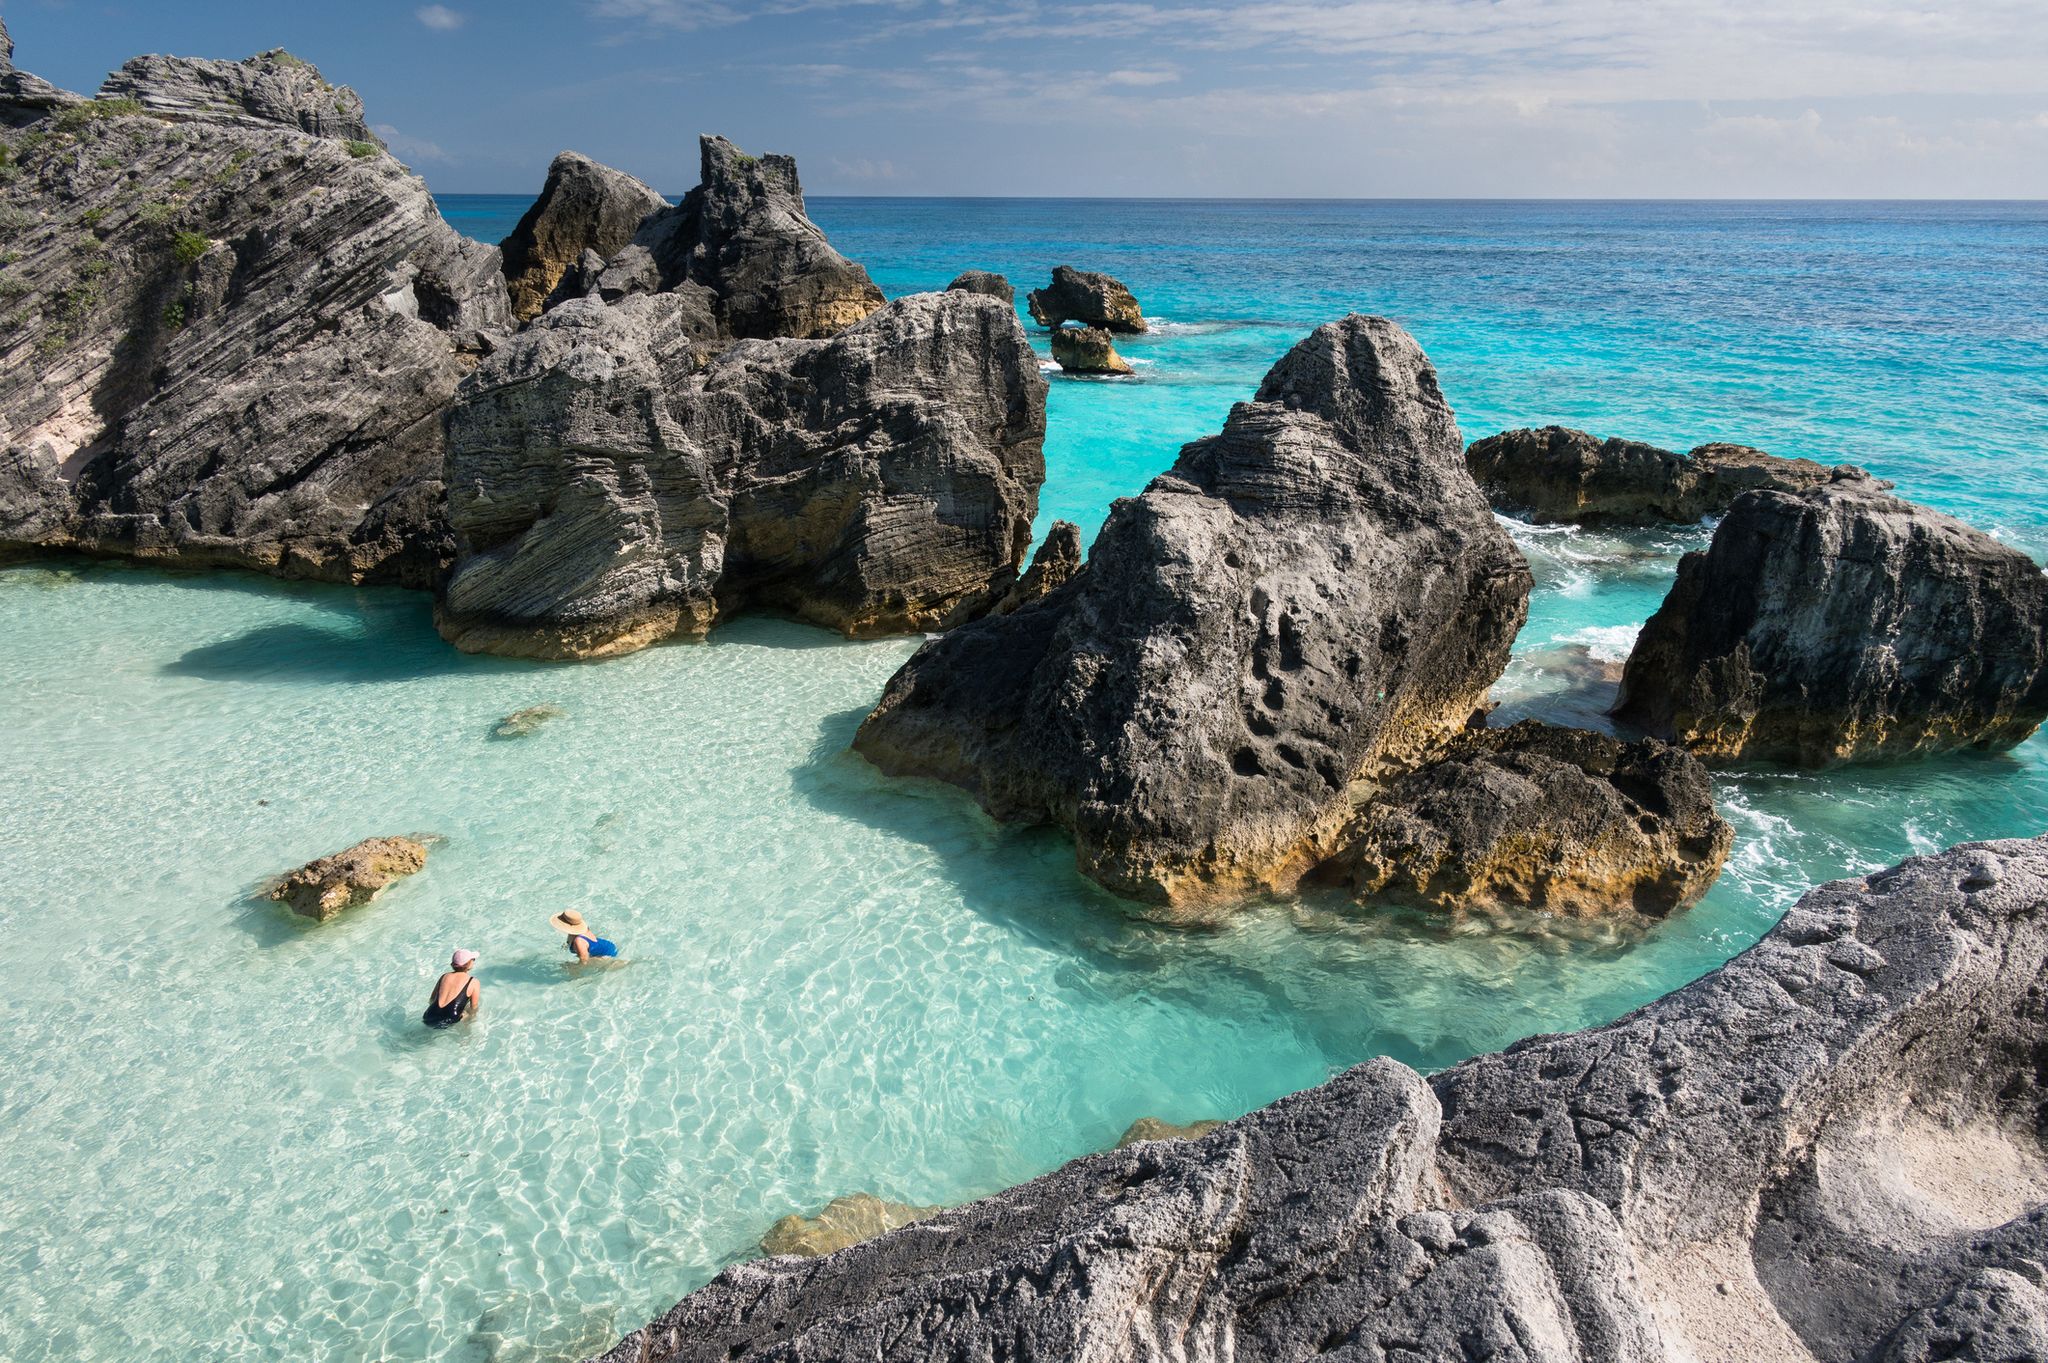 tourists enjoying the crystal clear waters of the atlantic ocean at the world famous horseshoe bay beach, bermuda